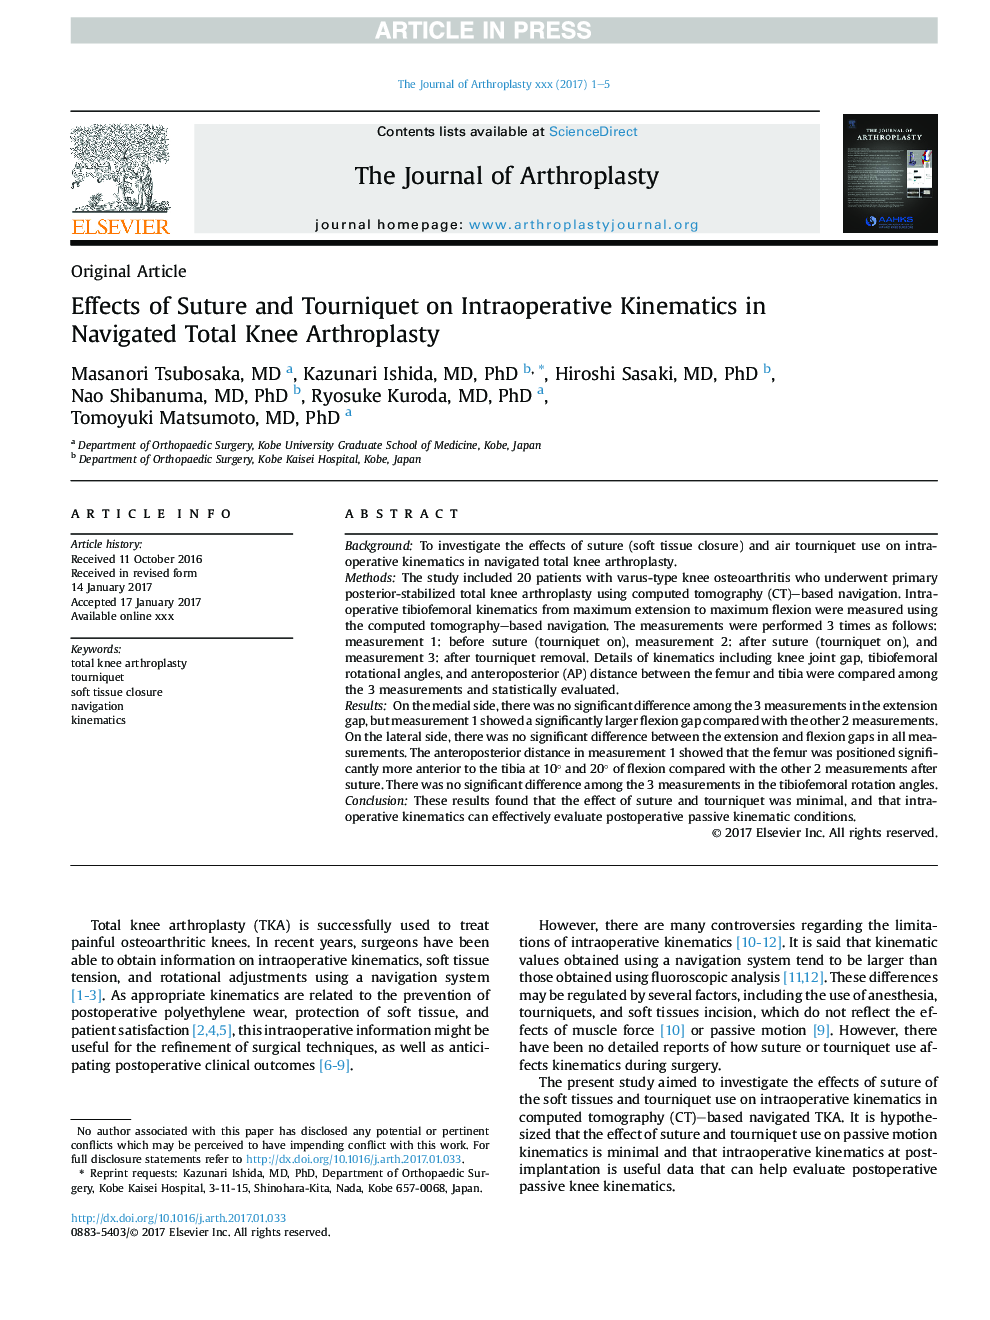 Effects of Suture and Tourniquet on Intraoperative Kinematics in Navigated Total Knee Arthroplasty